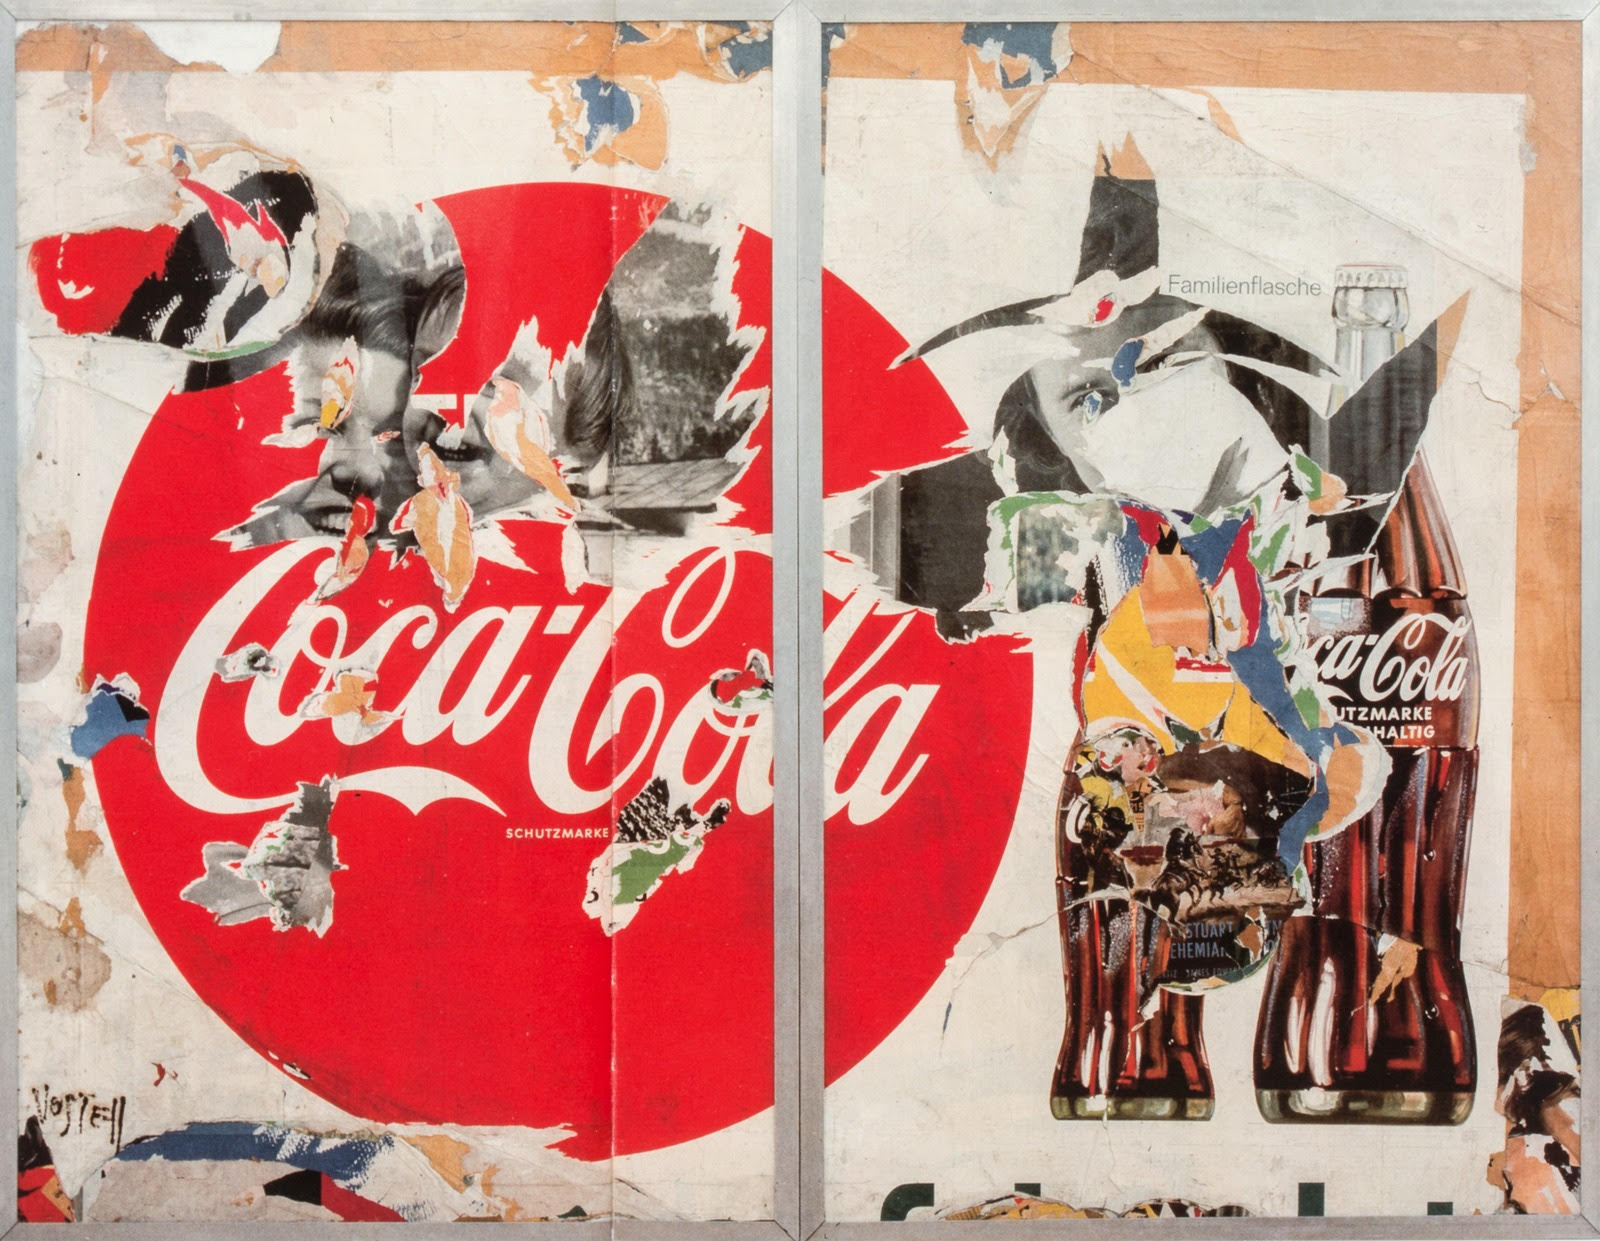 Coca Cola sign and collage art created by CMUK